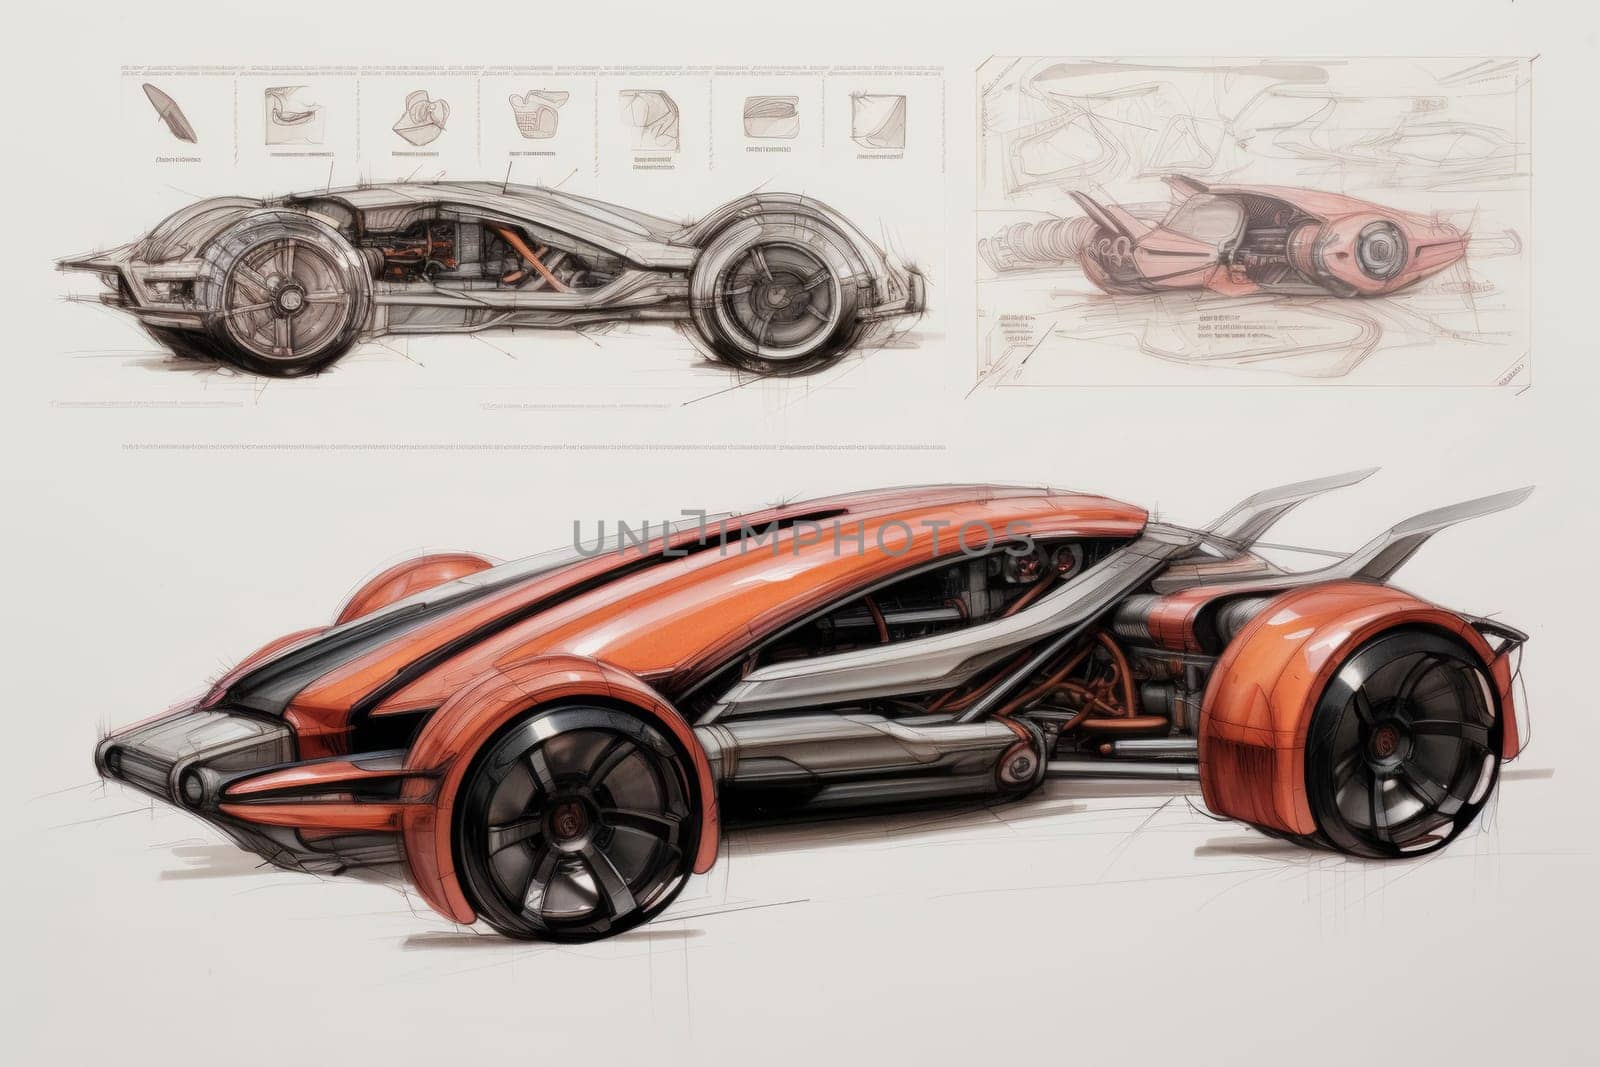 Concept Vehicle Design Illustrations by andreyz